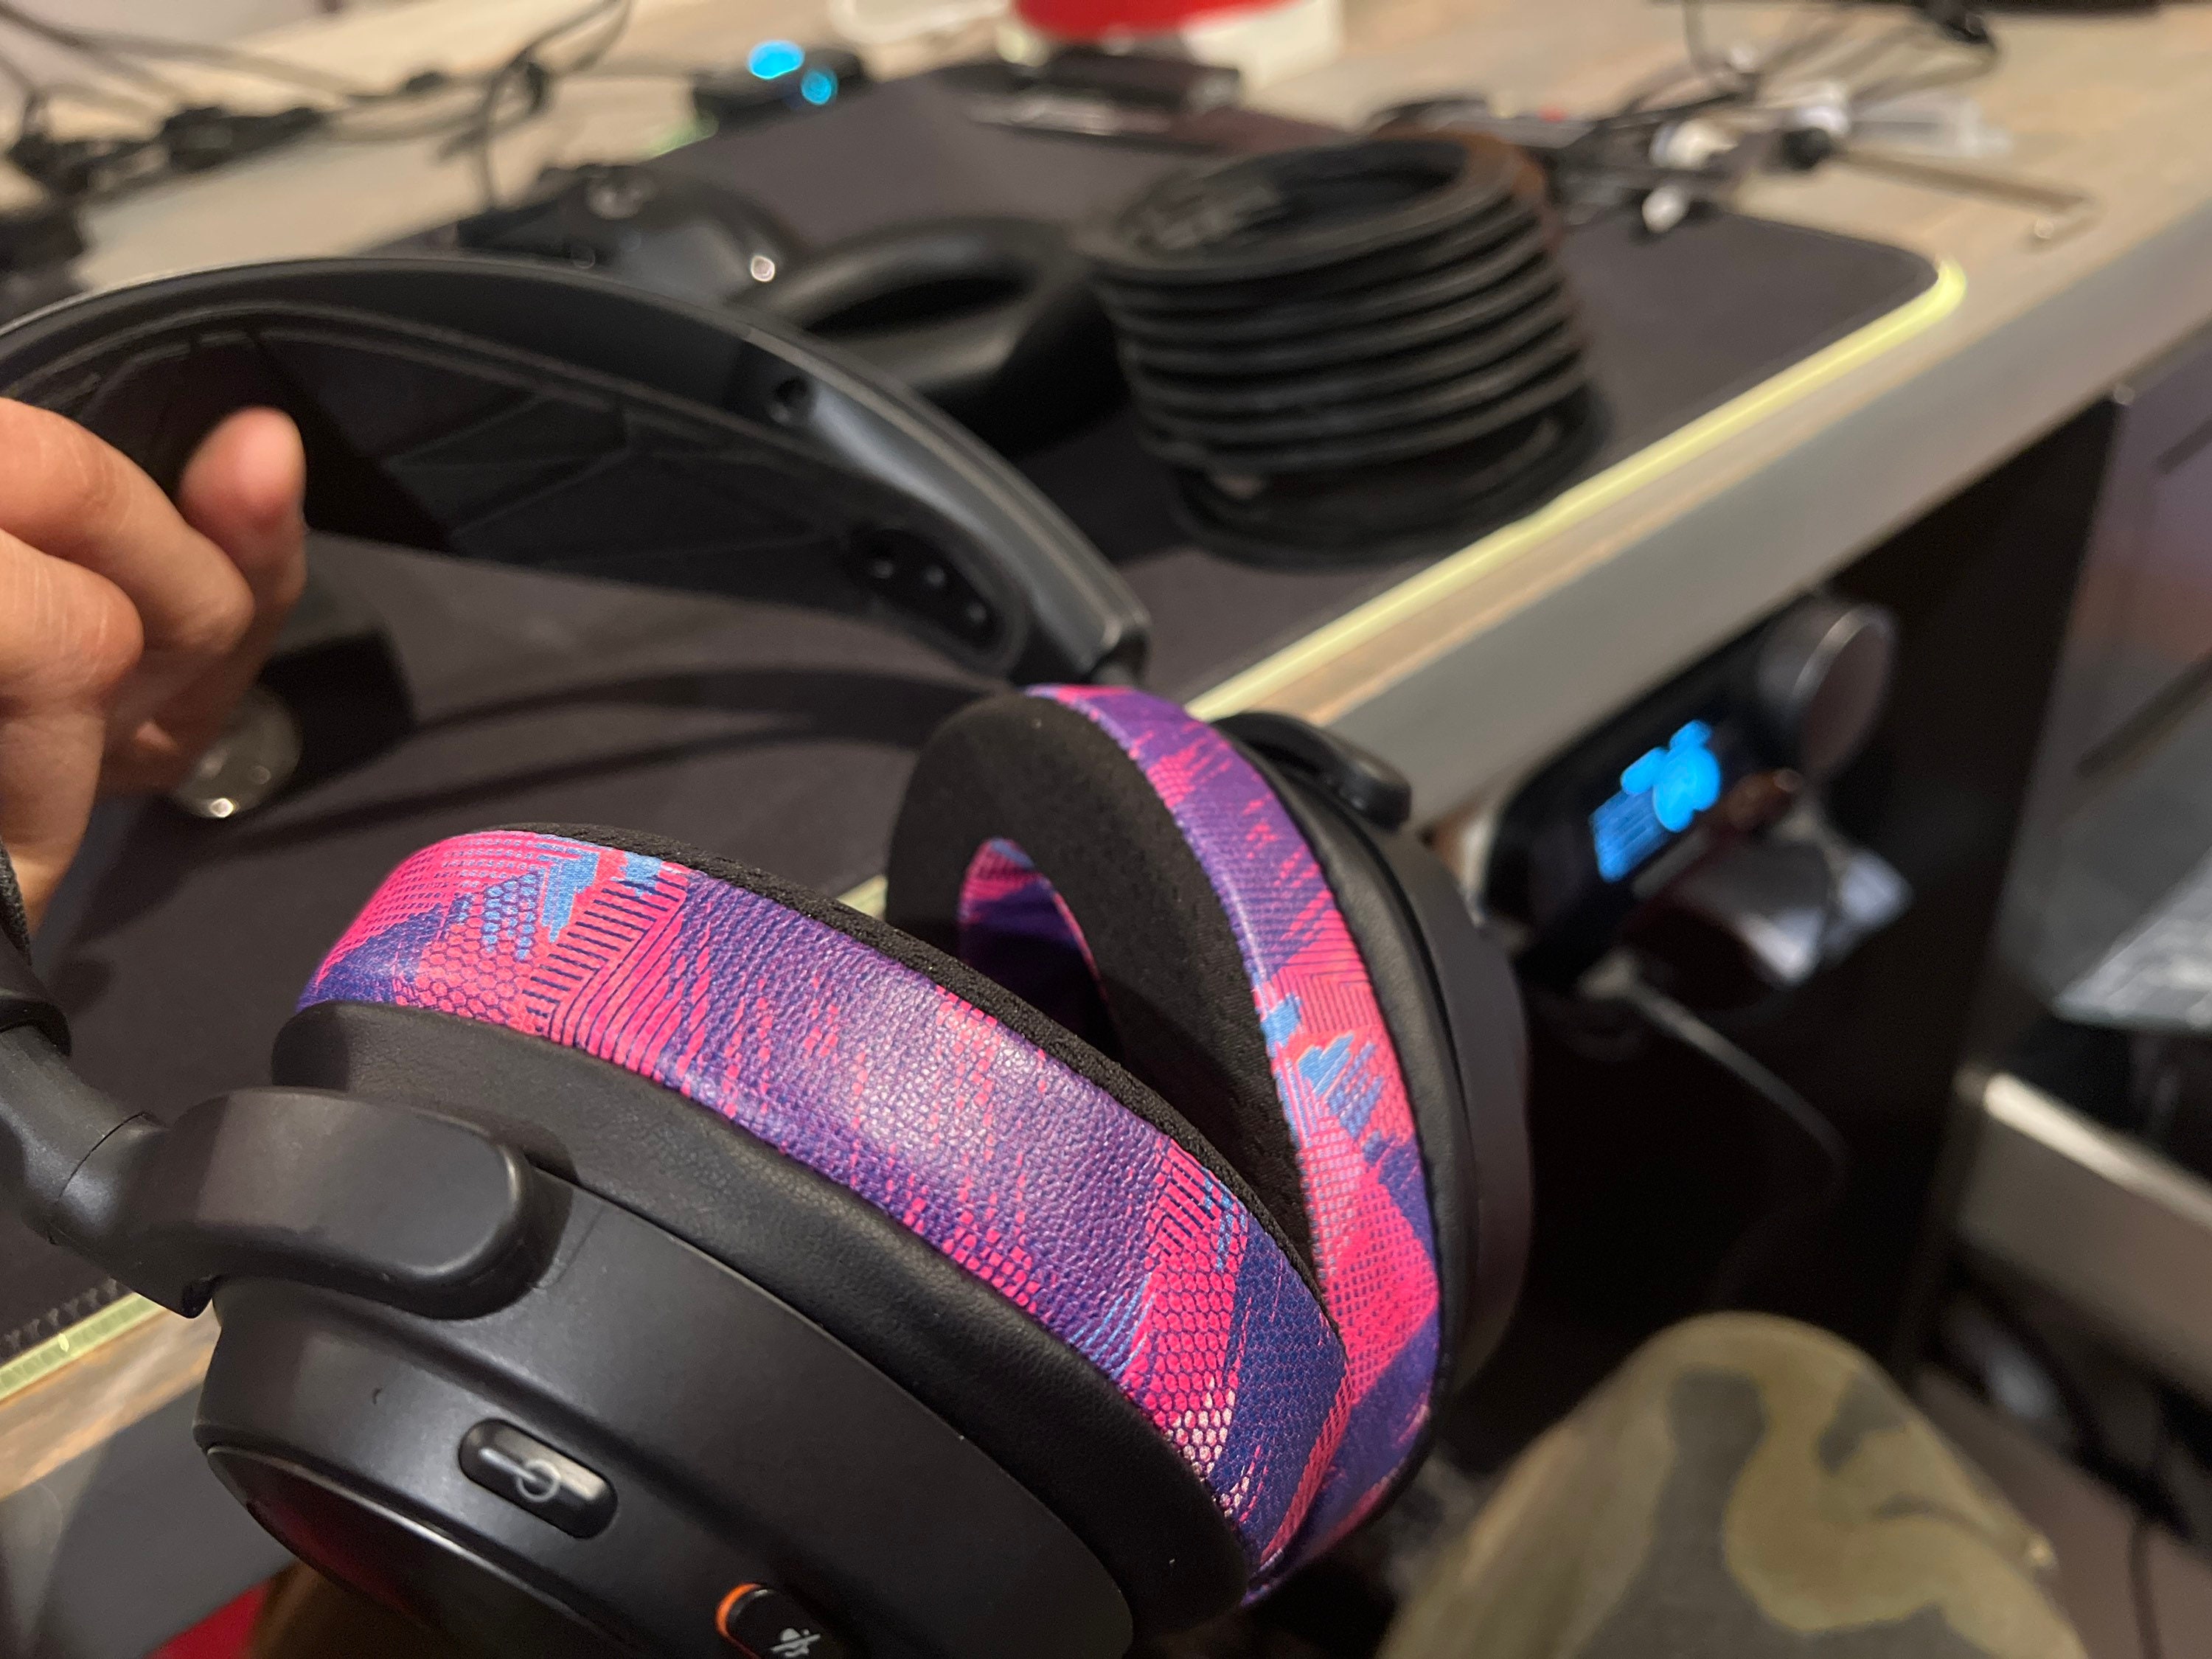 Arctis Nova Pro Wireless Earpads Adapter for Aftermarket Ear Pads  Steelseries 3d Printed and Felted for Sound ANC -  Israel